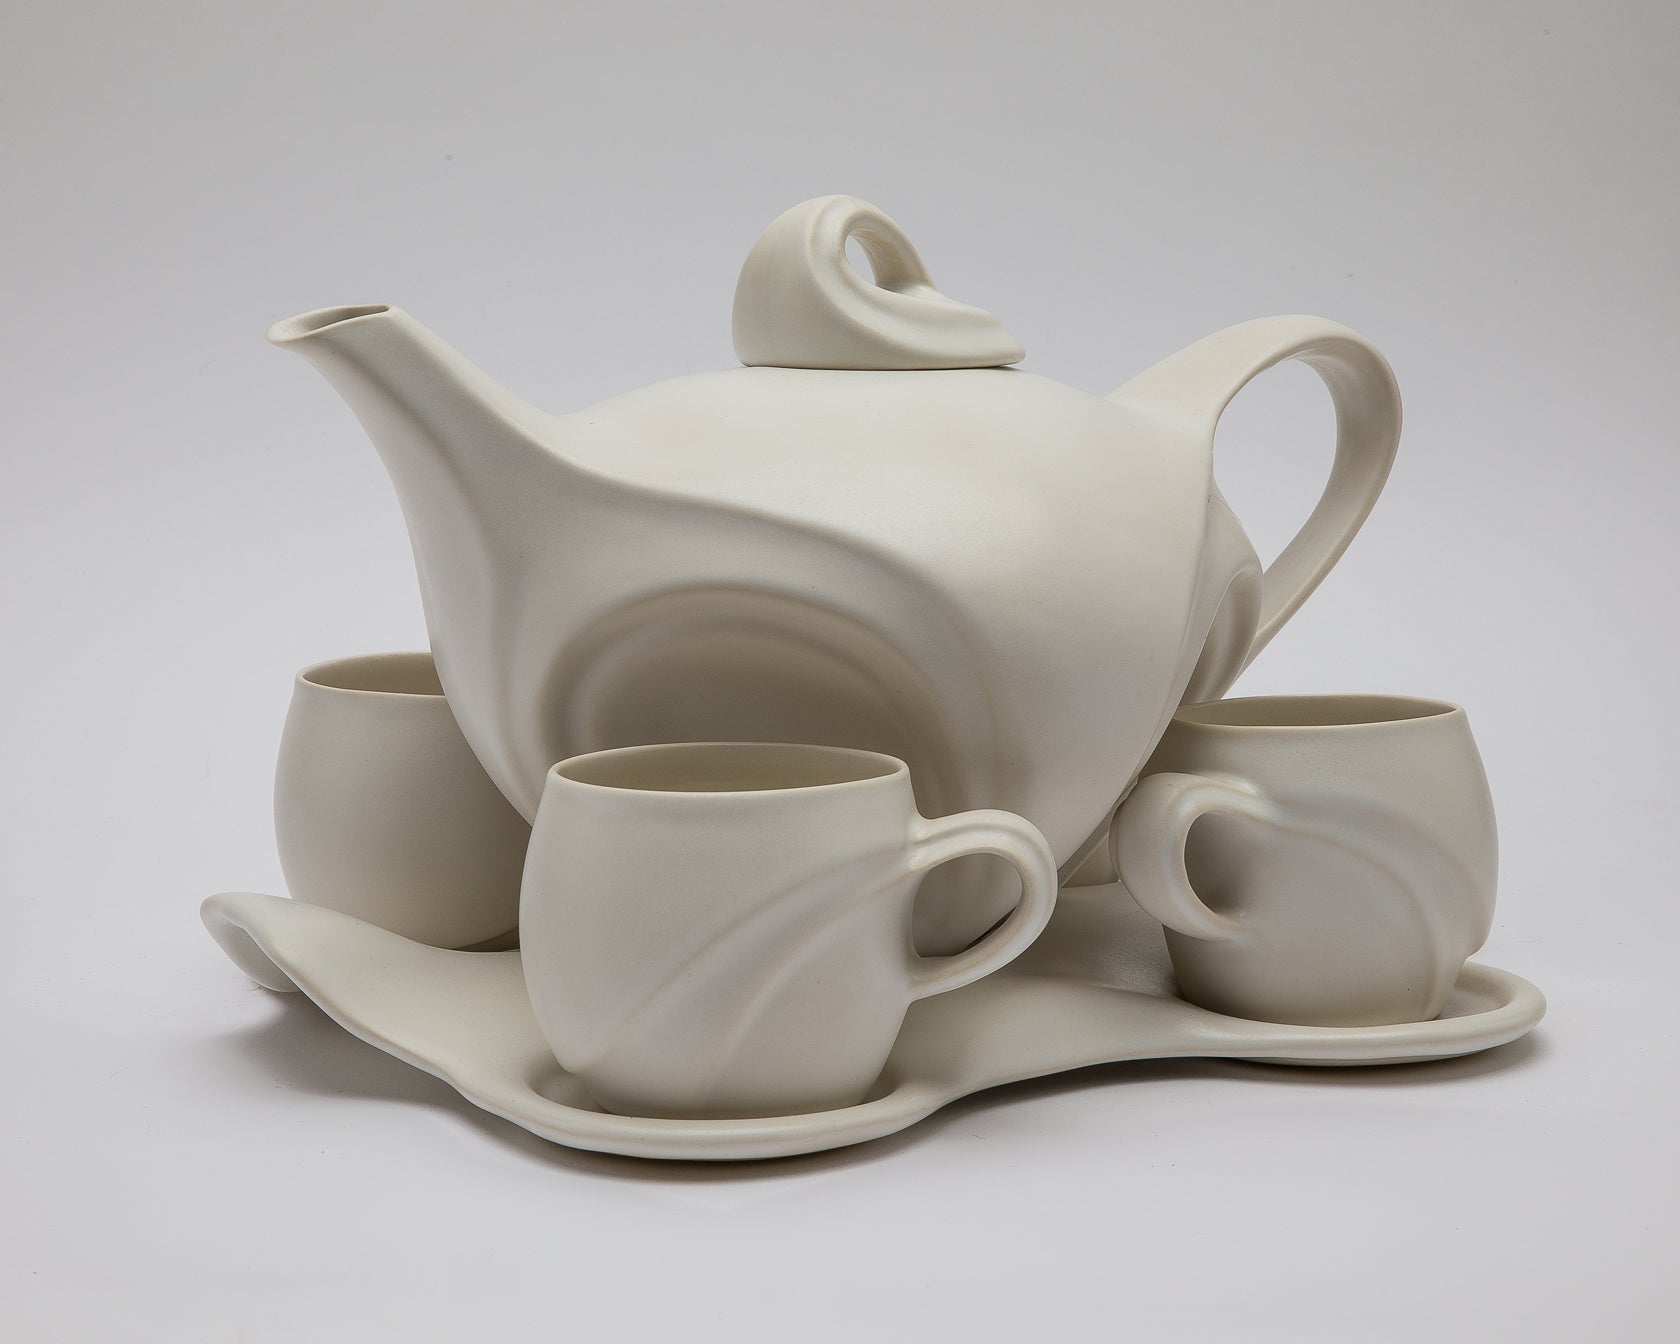 SOLD Space Age White Porcelain Teaset by Peter Saenger (Active 1970-Present)